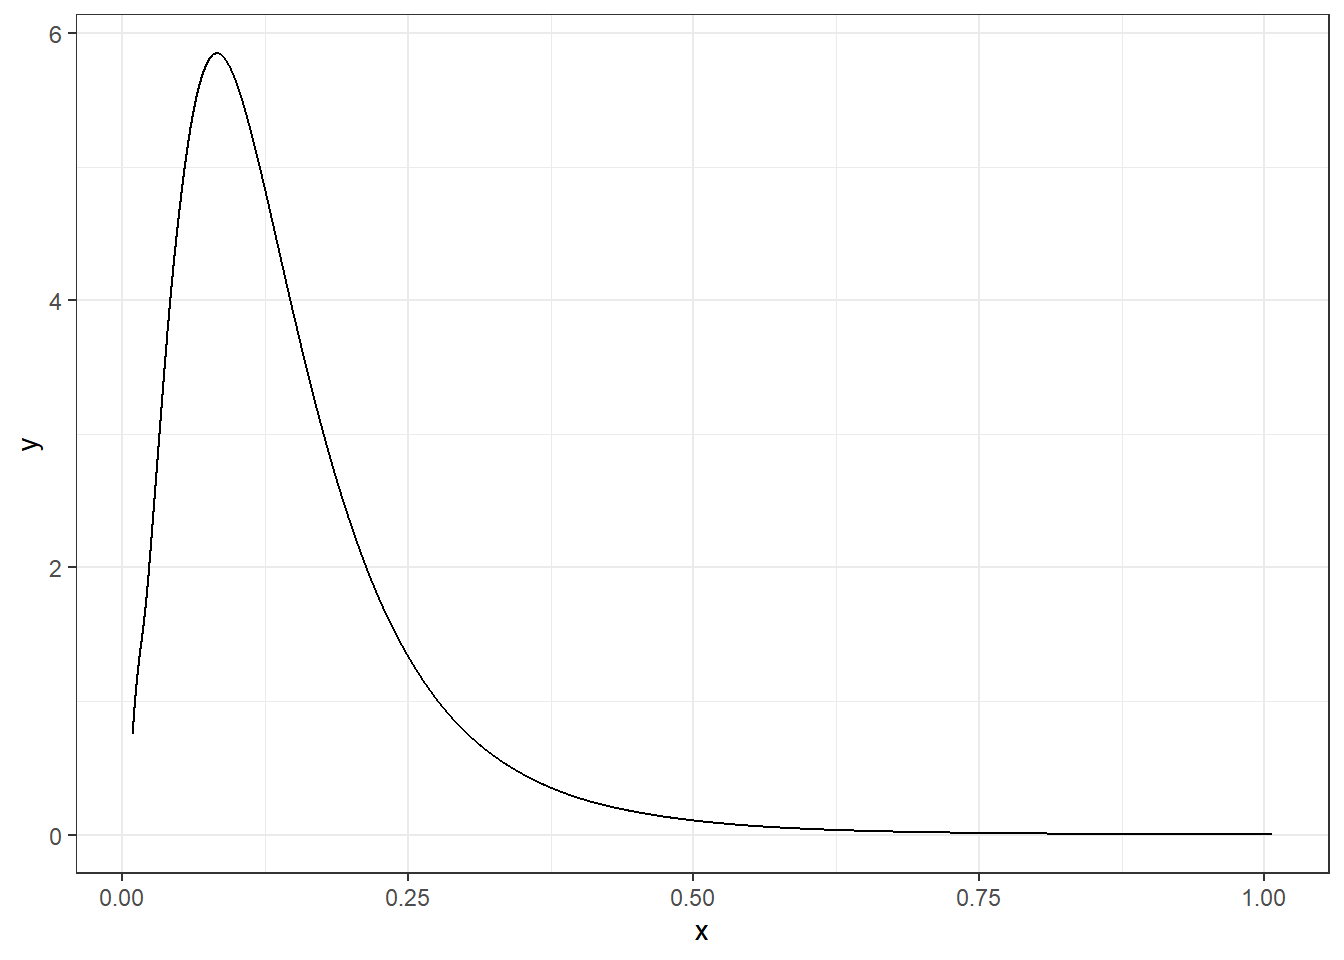 Posterior distribution of the variance of the random effect $u_i$.